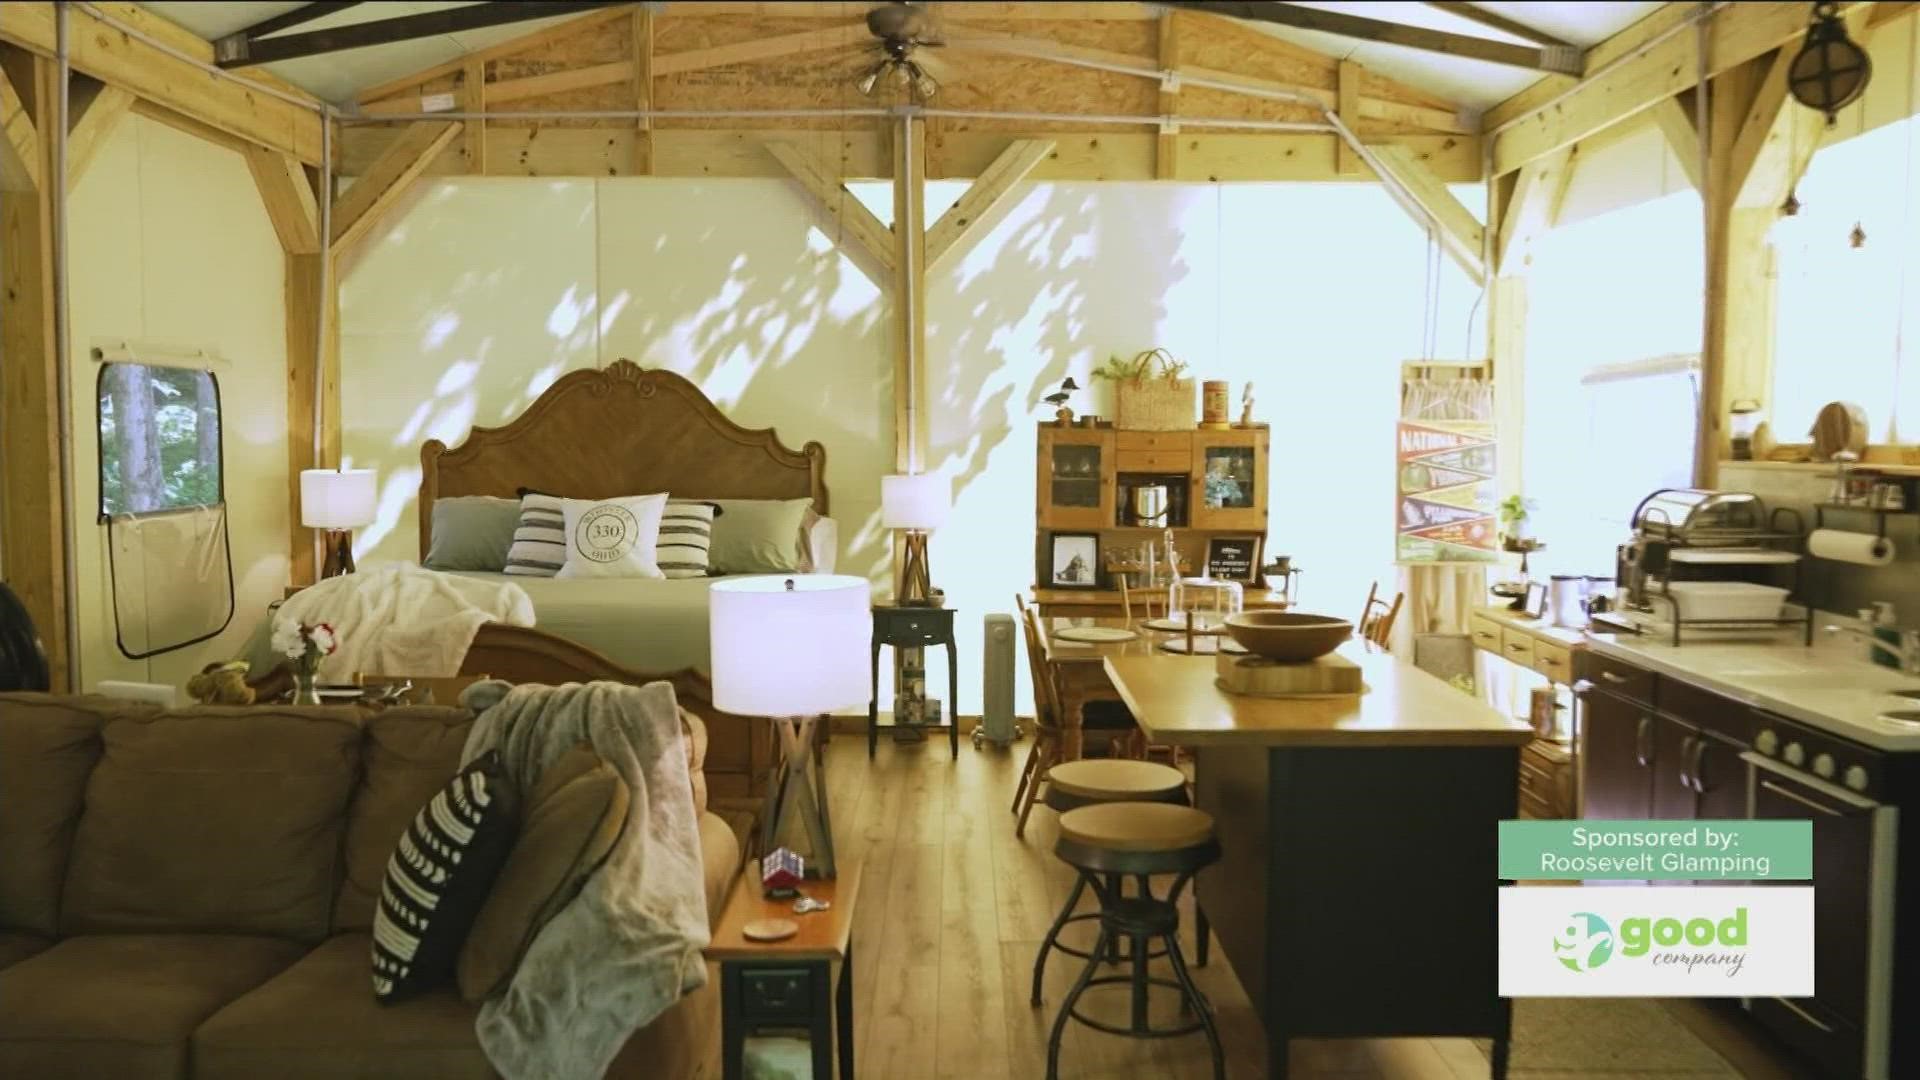 Joe speaks with Jenny Myers from Roosevelt Glamping about an exciting way to go camping!